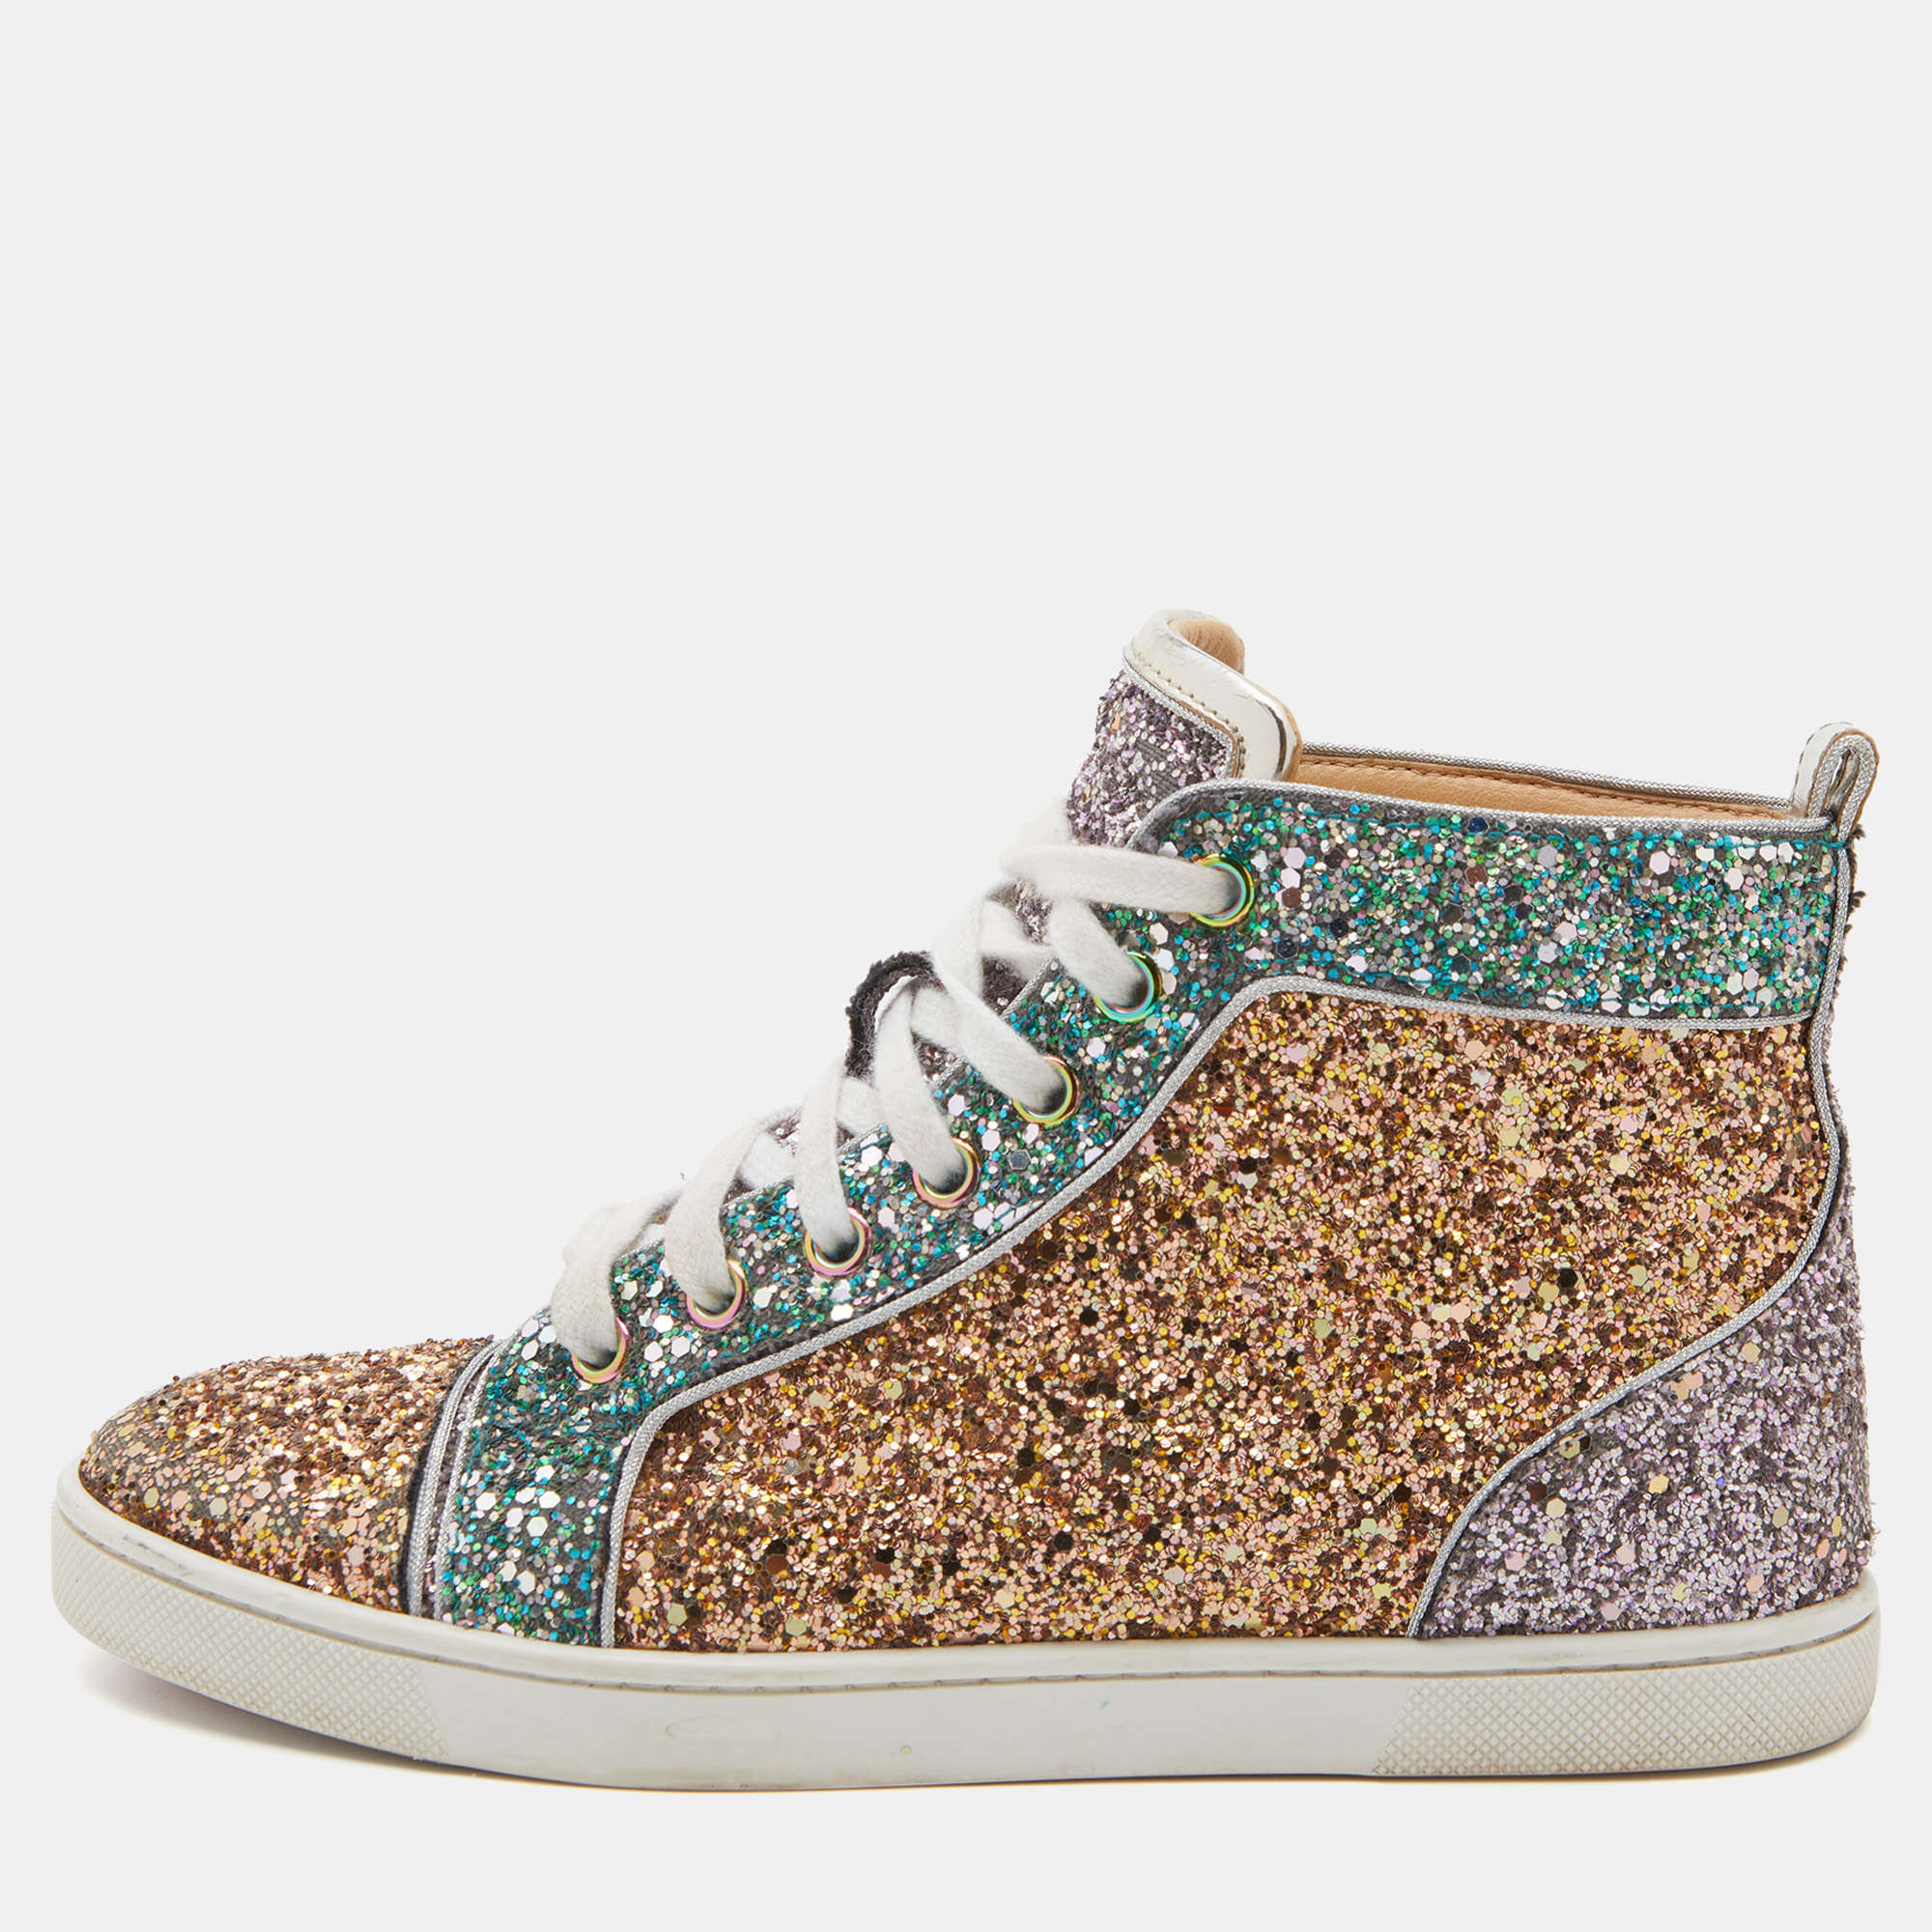 

Christian Louboutin Multicolor Glitter Fabric Bip Bip High Top Sneakers Size